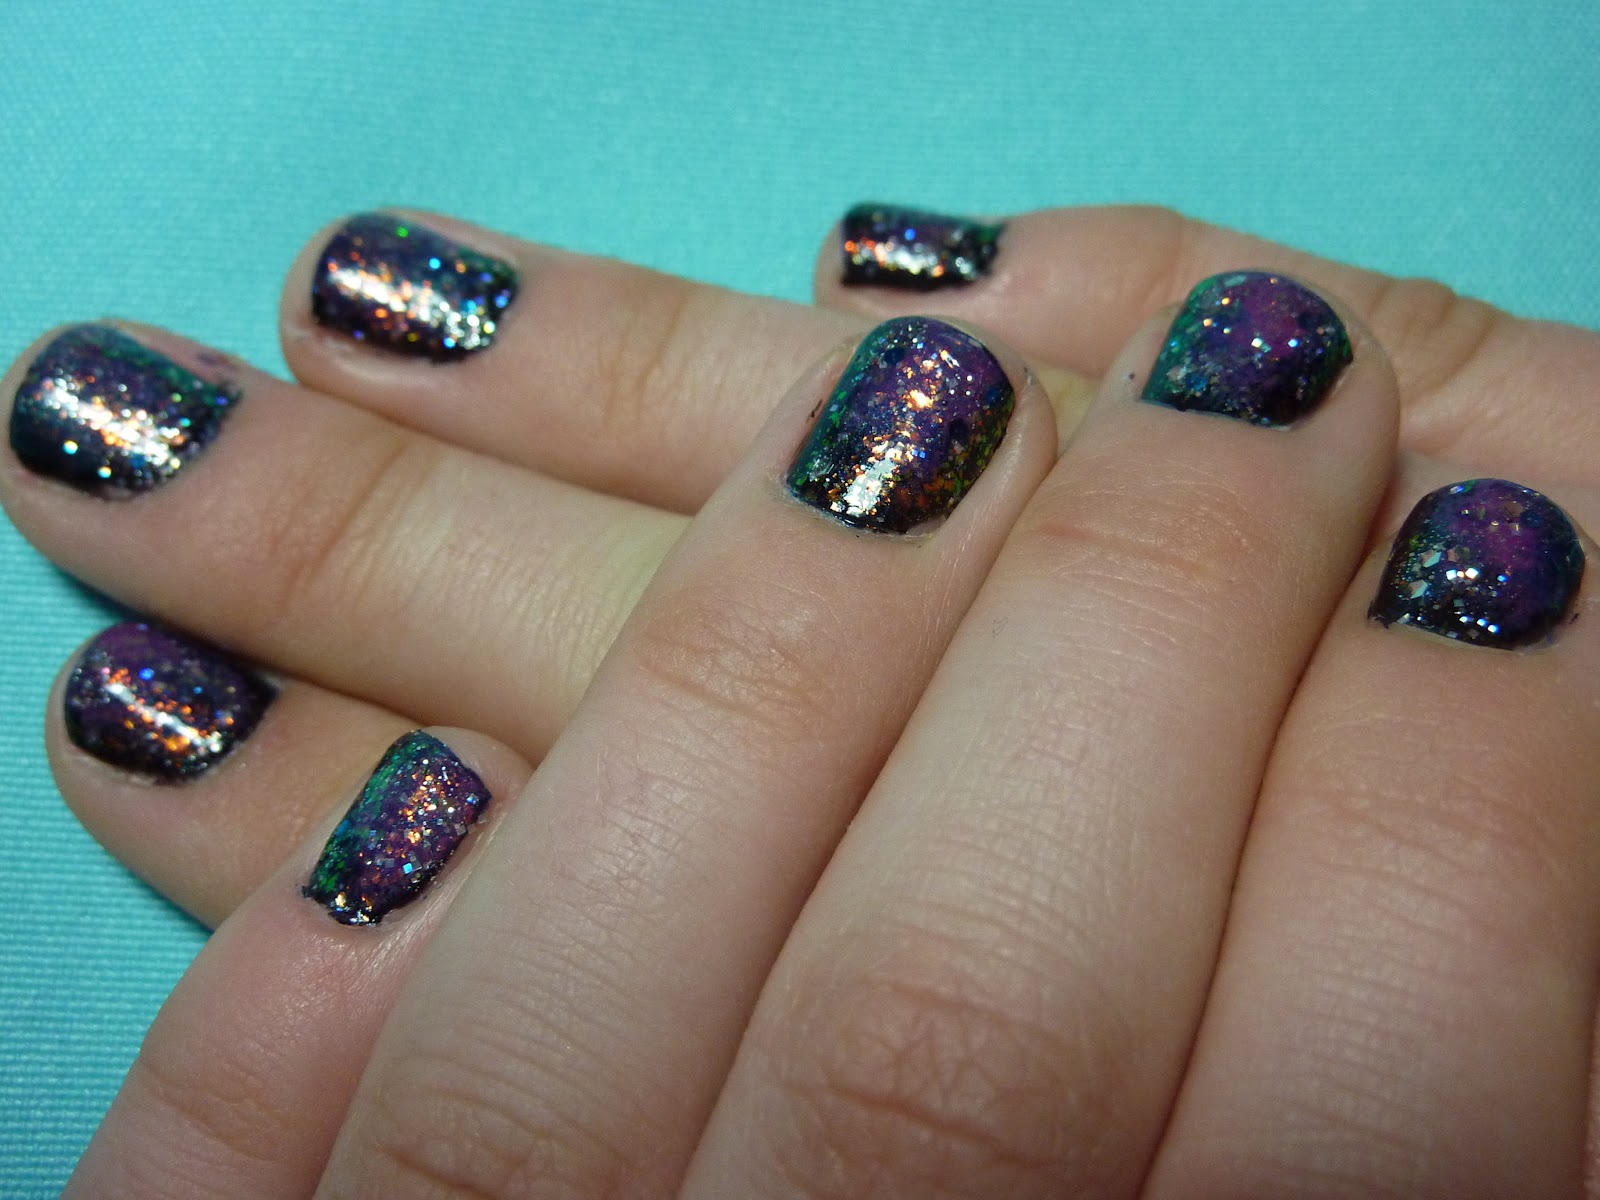 If your obsessed with nail art you probably heard of Galaxy Nails!